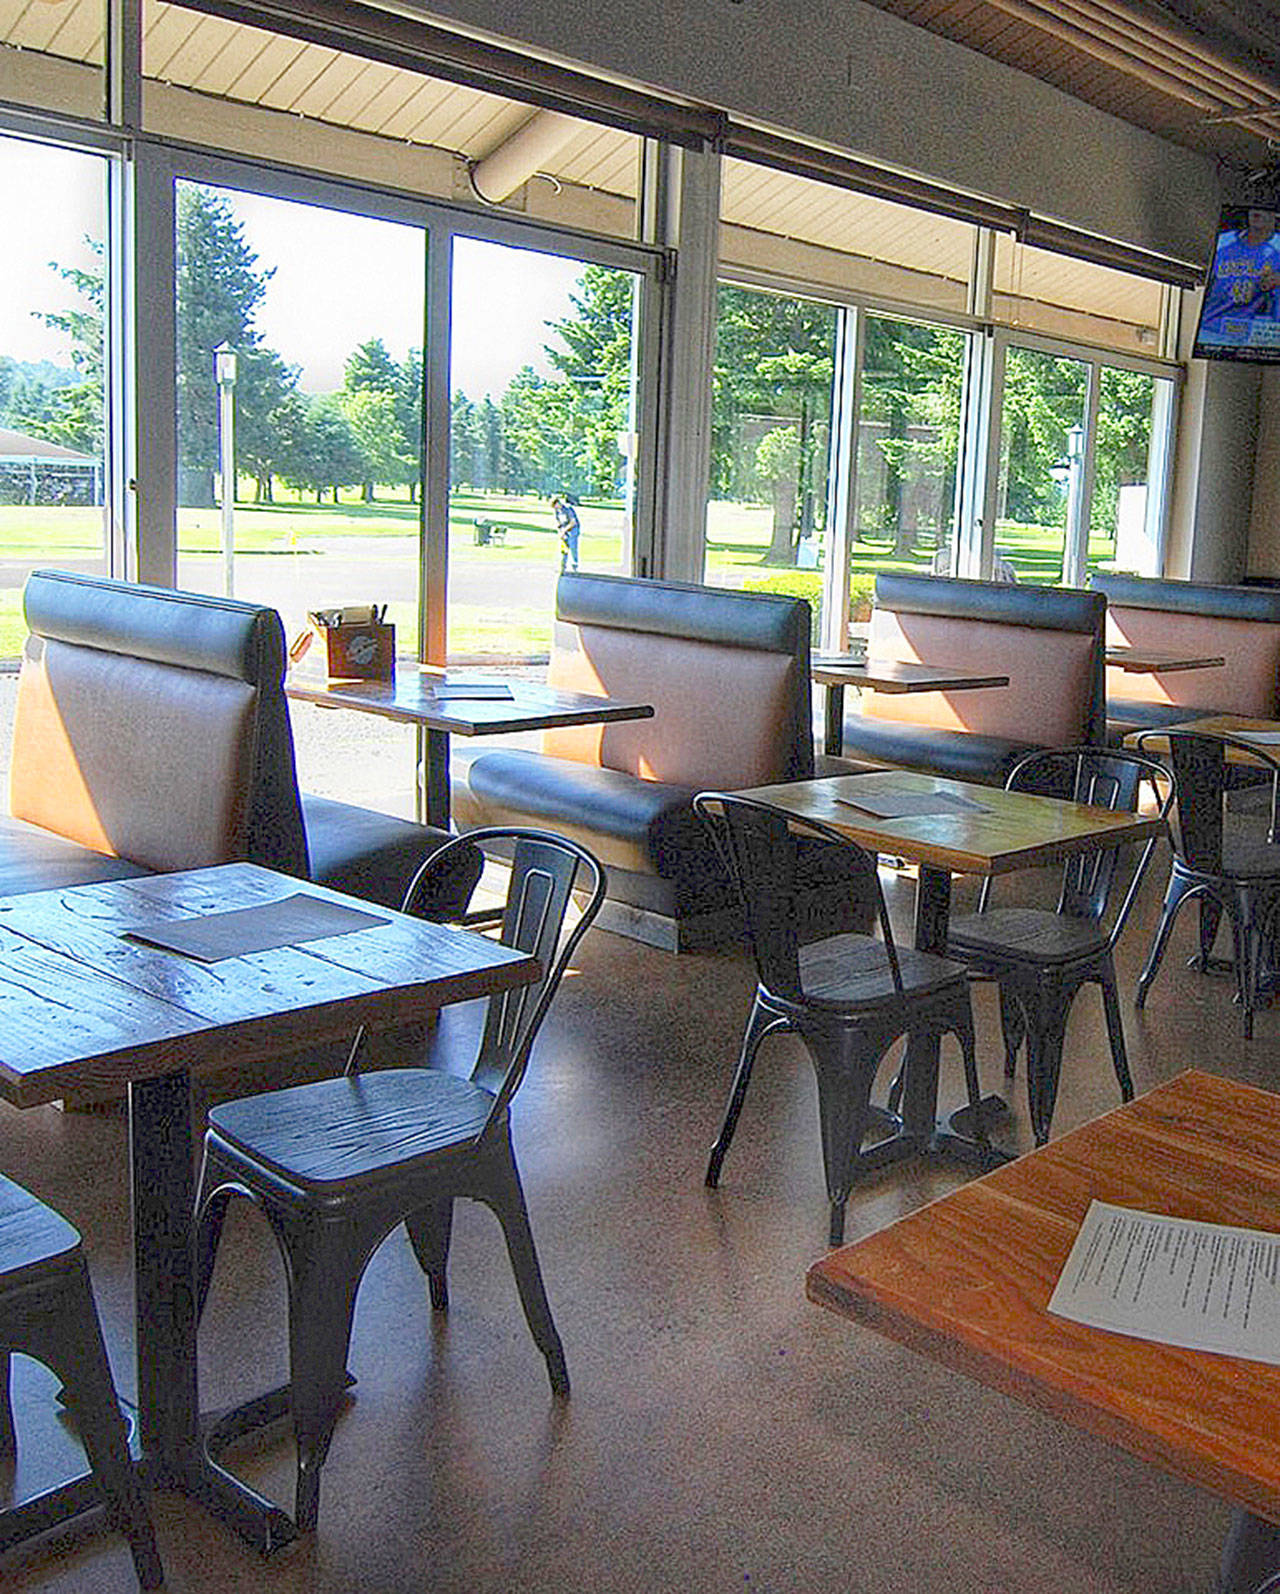 The Half Lion Public House is open for business at the Riverbend Golf Complex in Kent. COURTESY PHOTO, Half Lion